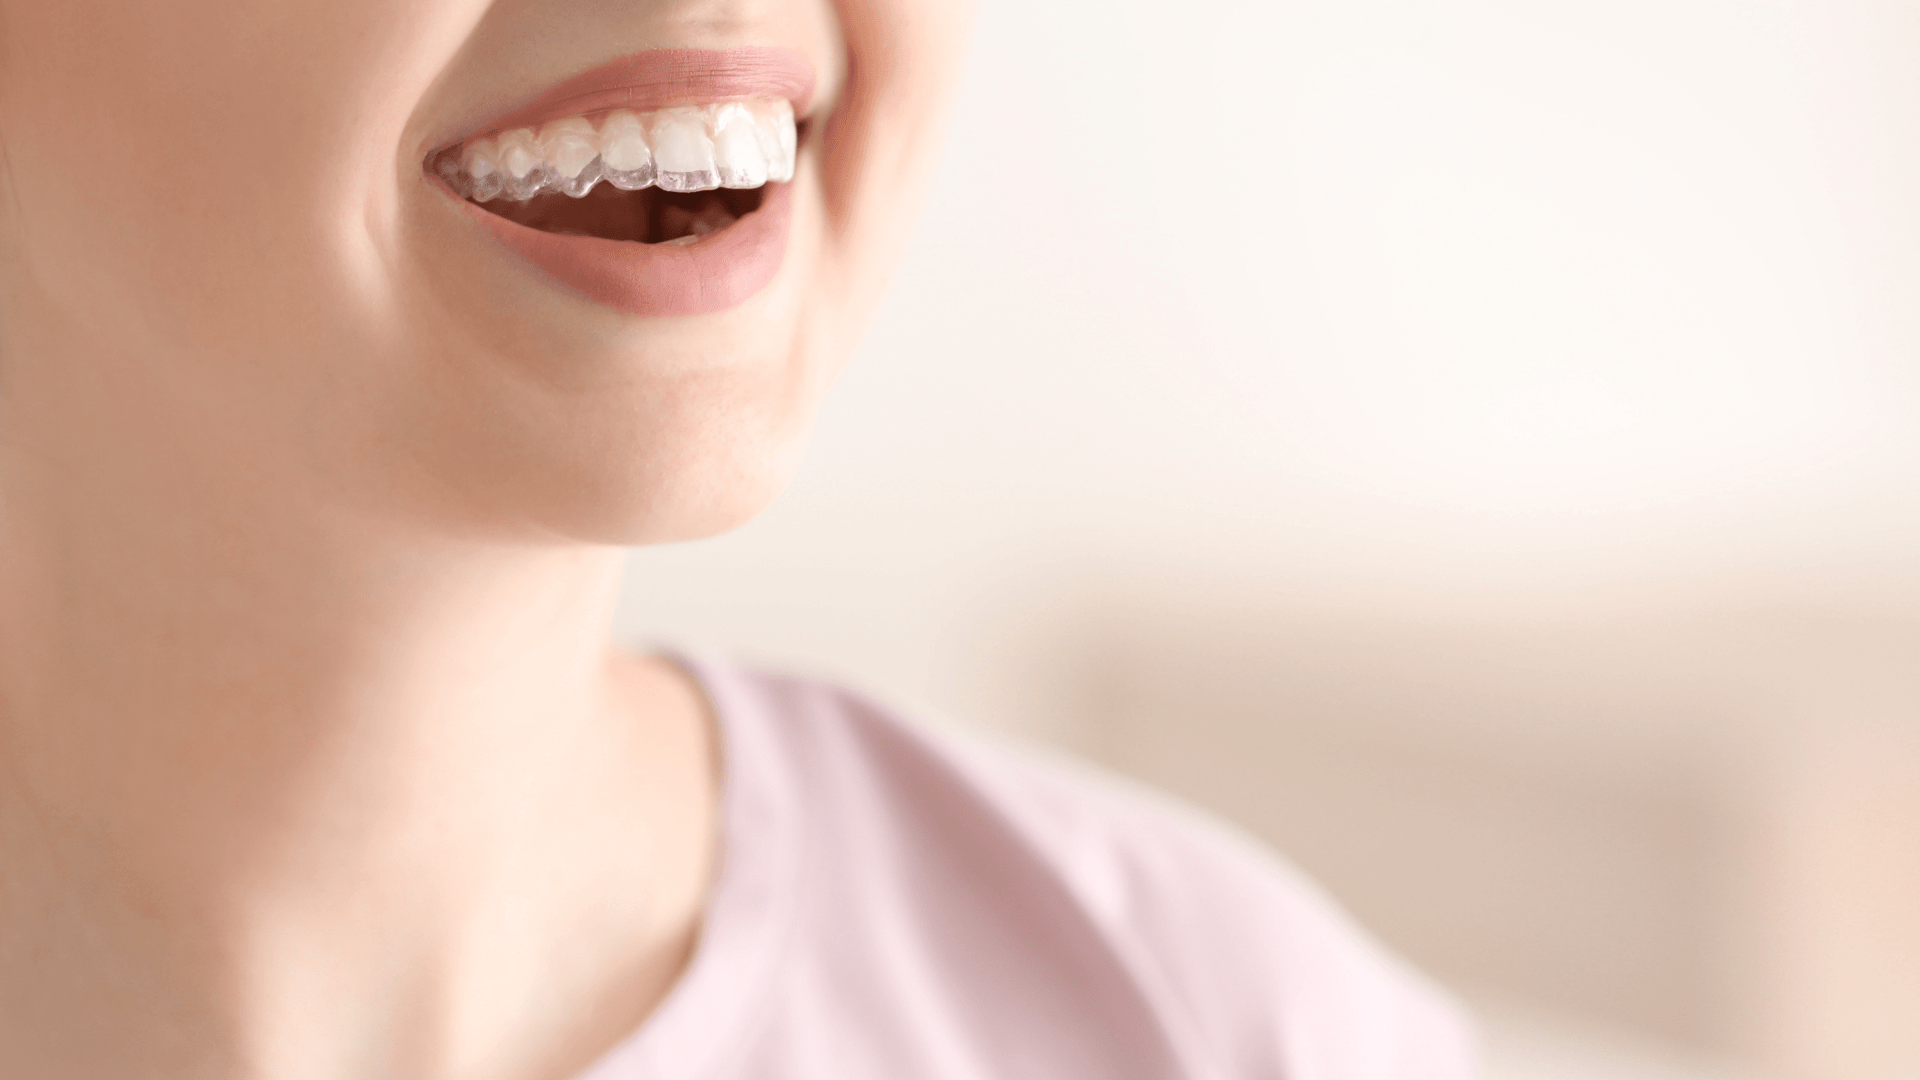 What is an Occlusal Guard? Do I need One?